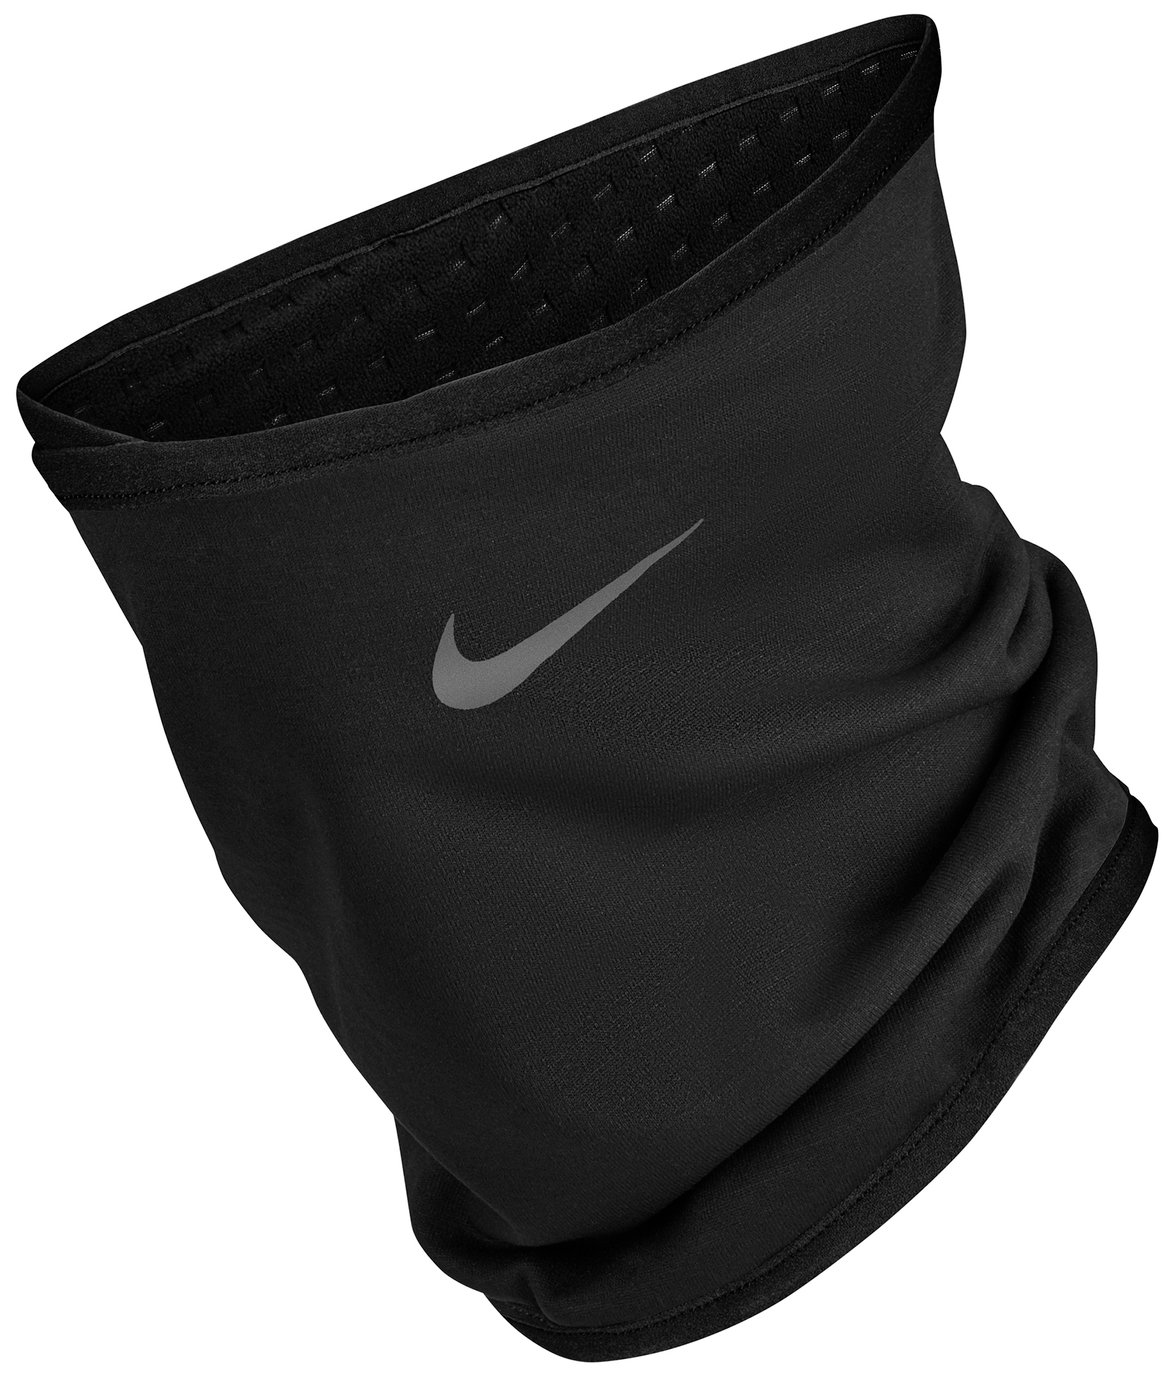 Nike Therma Sphere Neck Warmer - Large/Extra Large